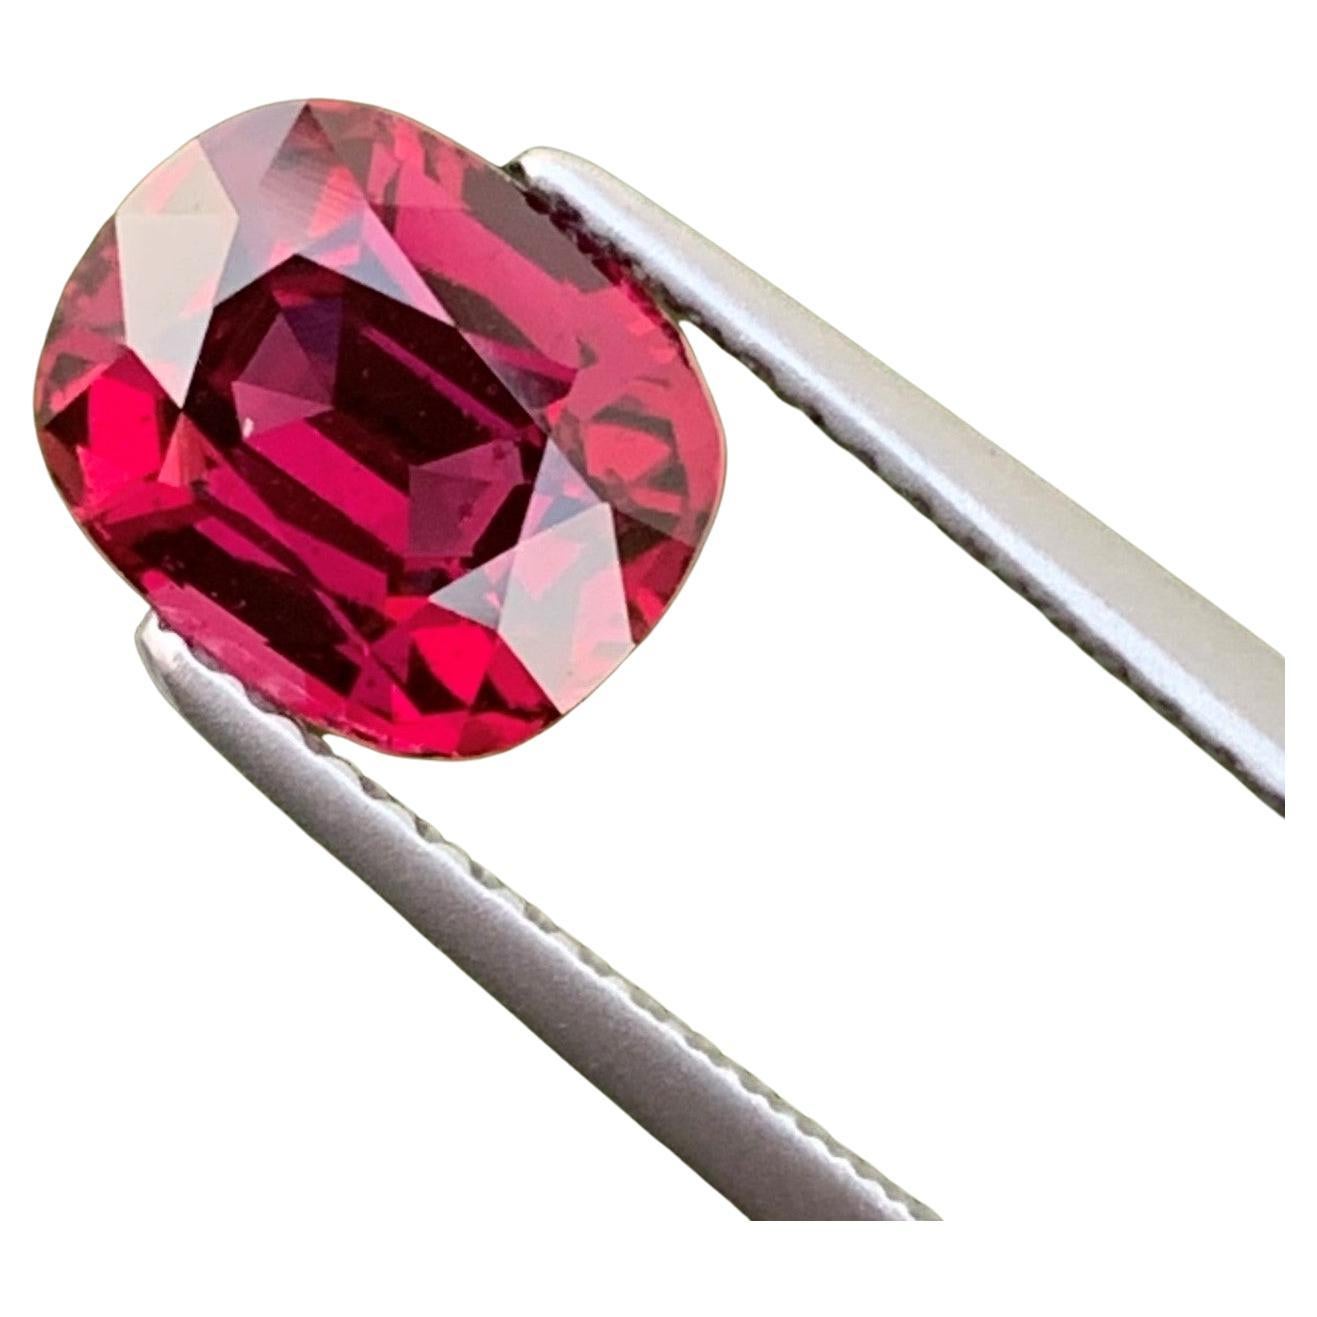 Natural Faceted 2.40 Carat Rhodolite Garnet From Tanzania For Sale